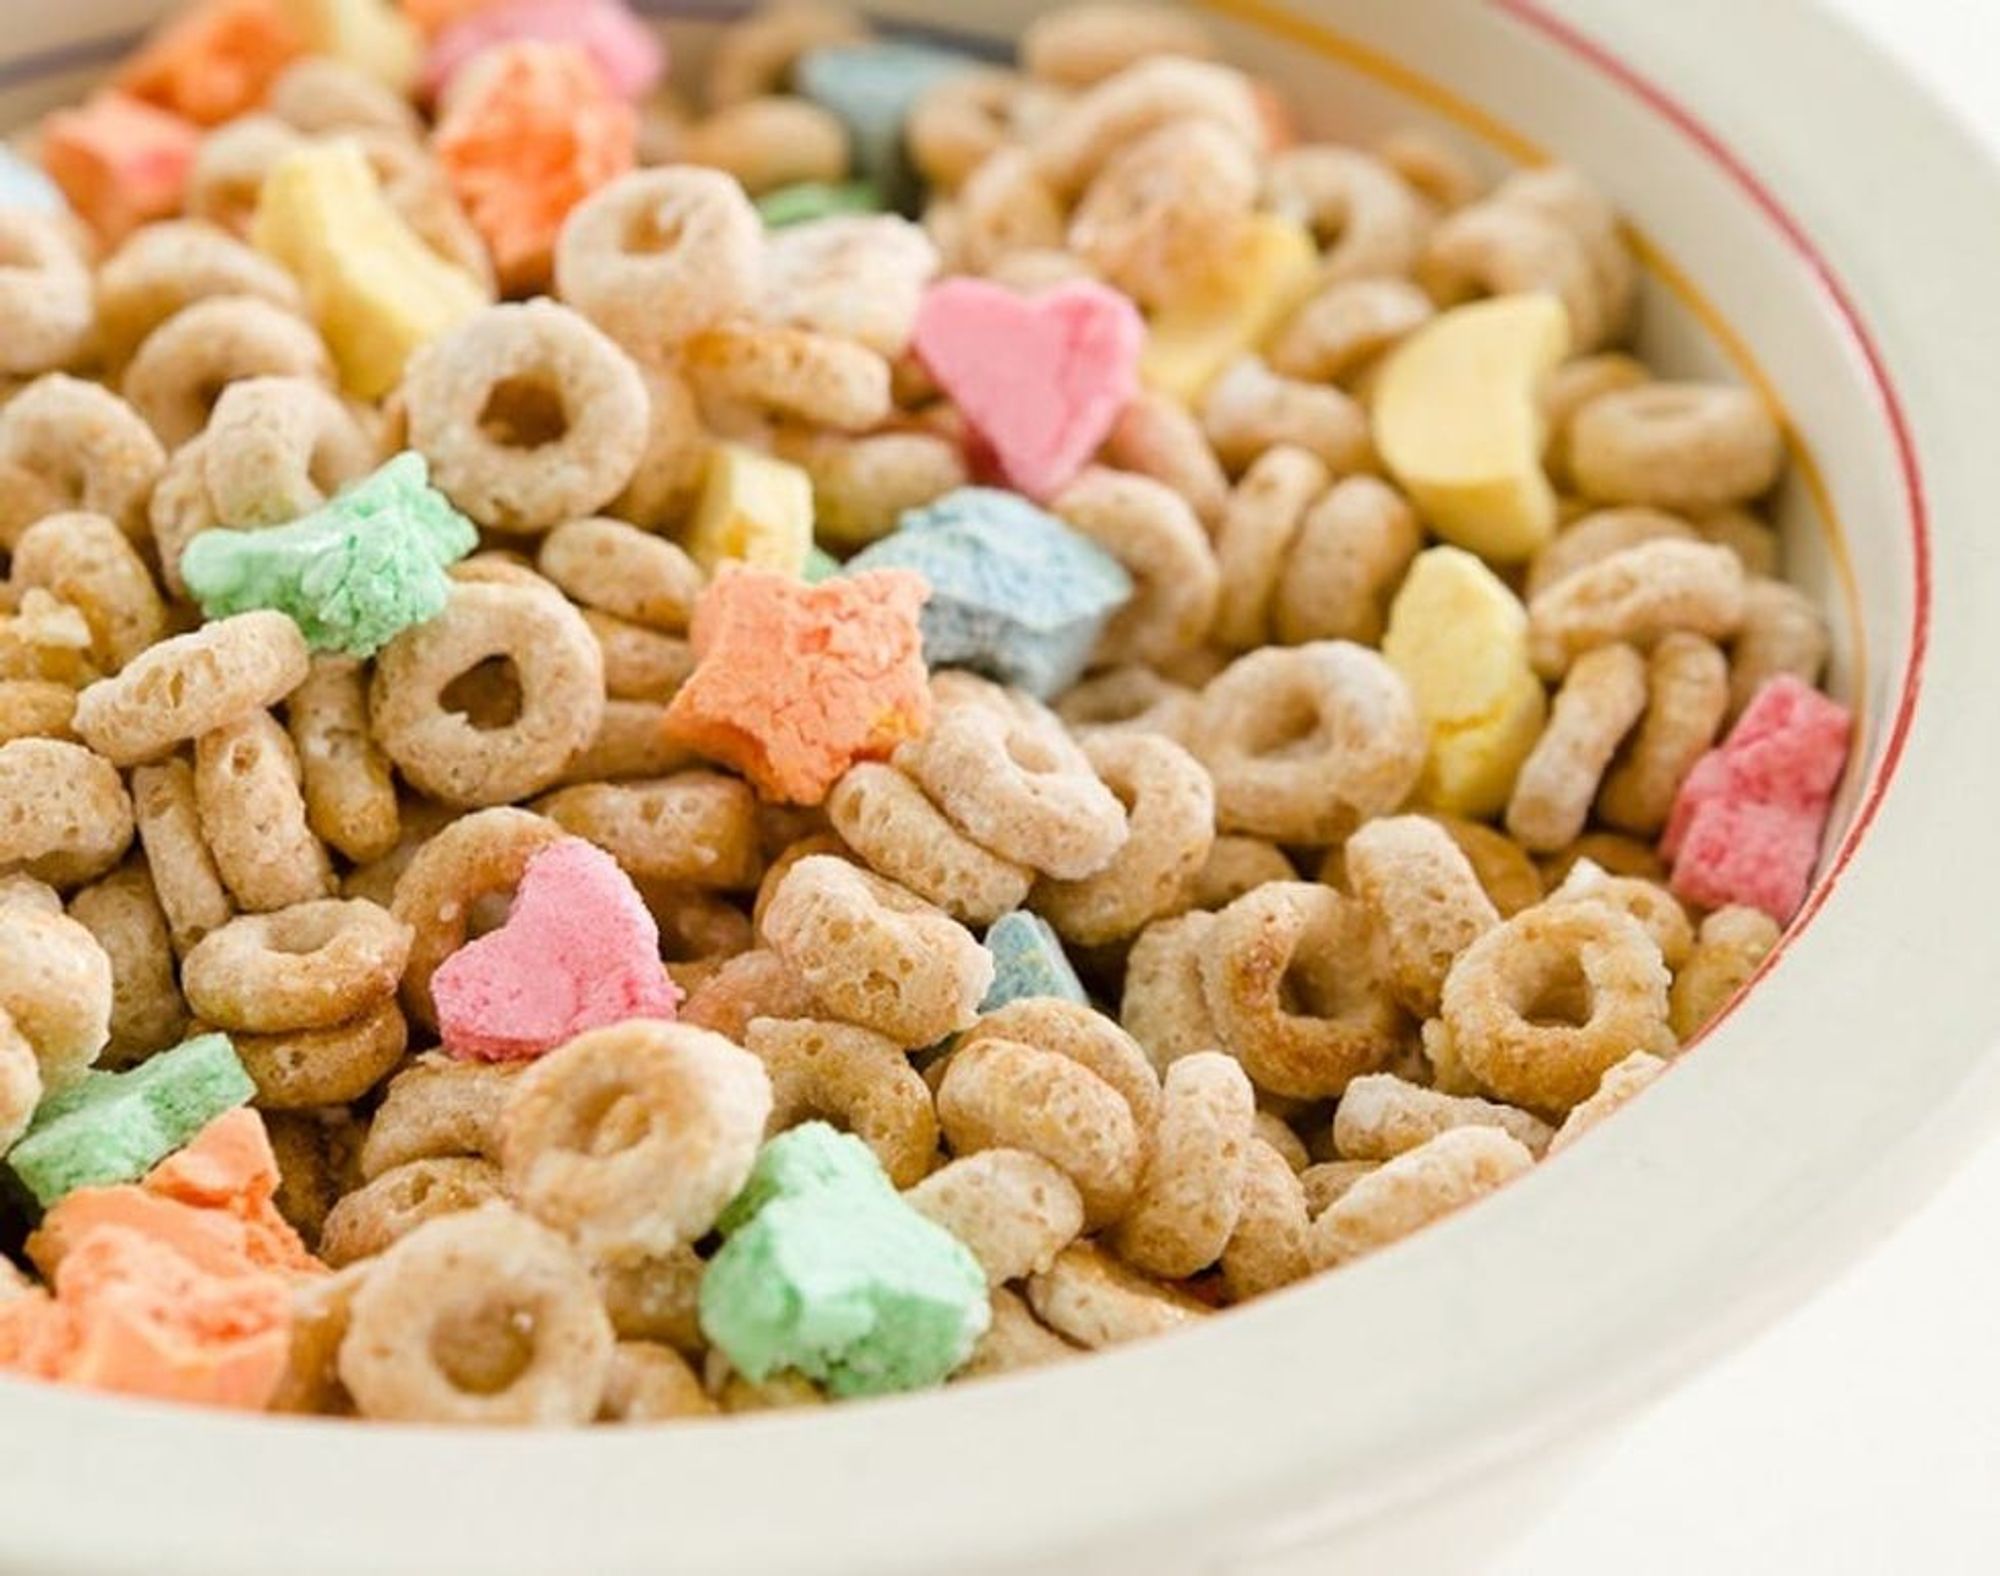 make-homemade-lucky-charms-11-other-classic-cereal-recipes-brit-co